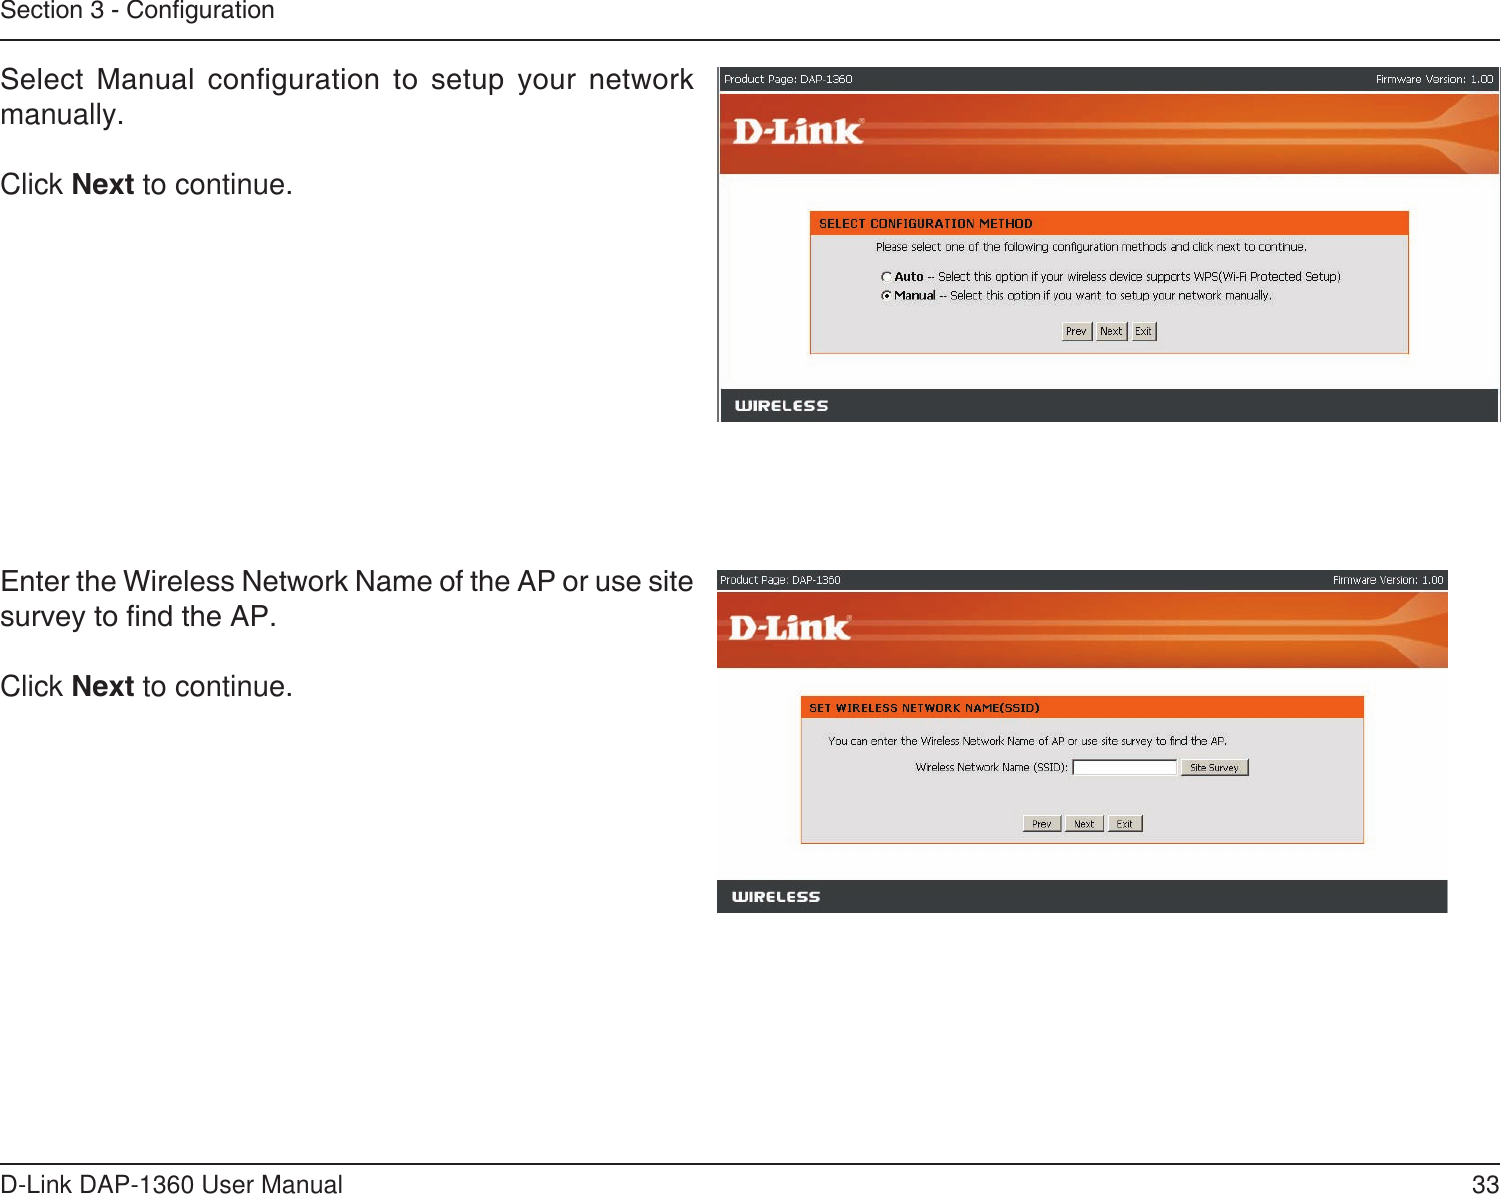 33D-Link DAP-1360 User ManualSection 3 - CongurationEnter the Wireless Network Name of the AP or use site survey to nd the AP.Click Next to continue. Select  Manual  conguration  to  setup  your  network manually.Click Next to continue.